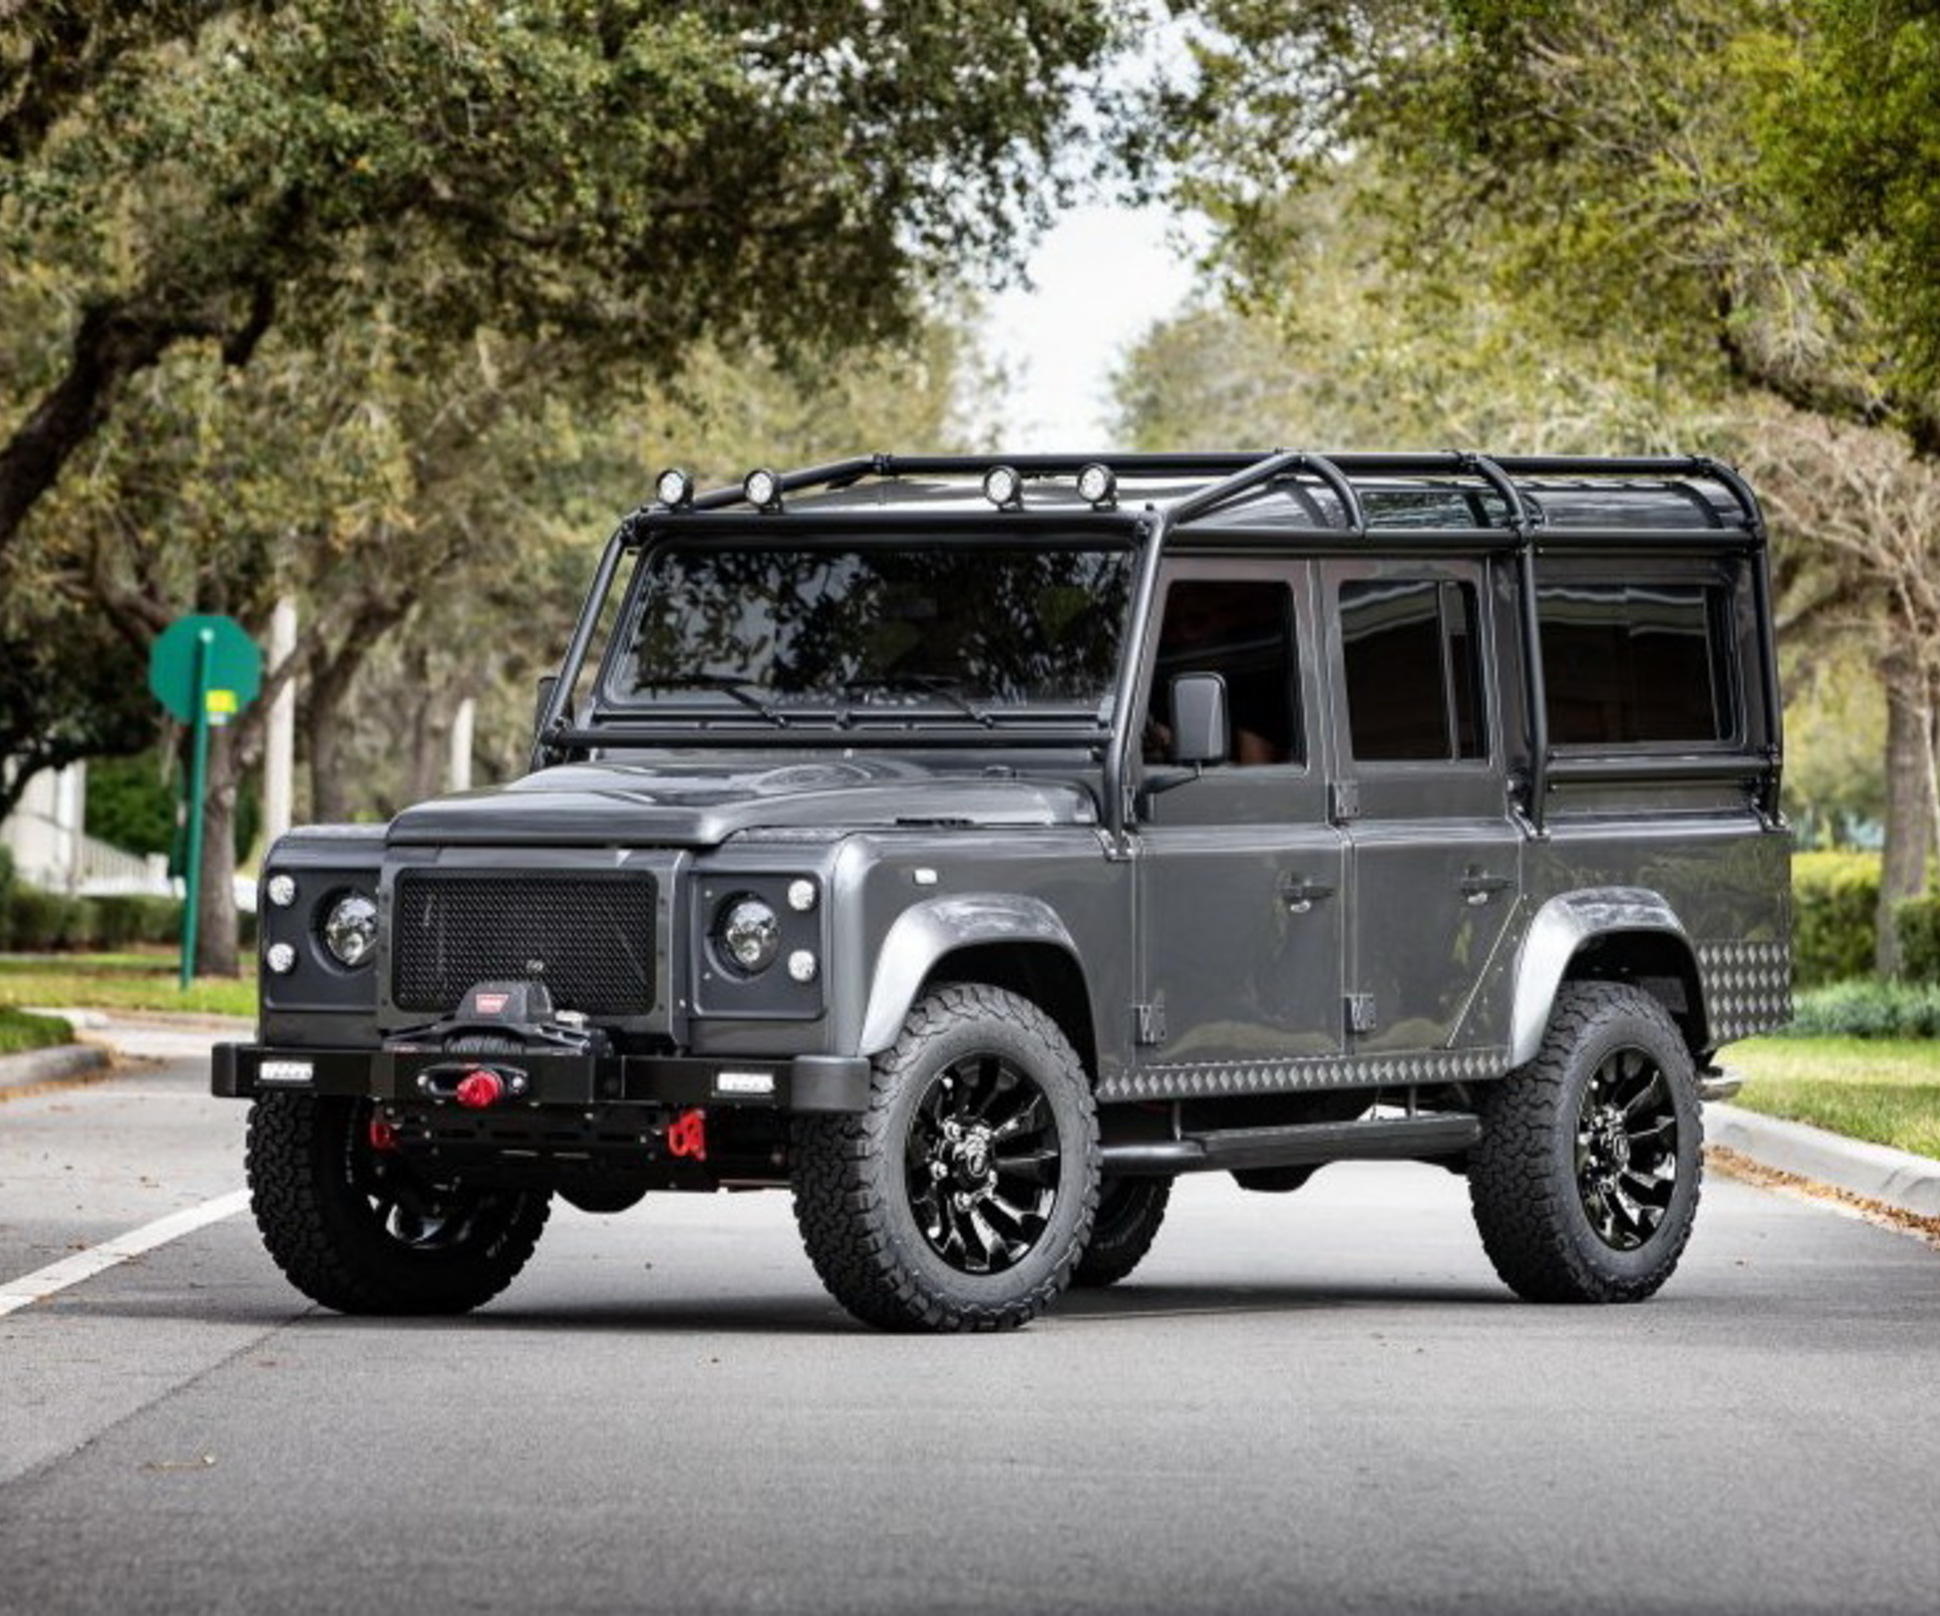 Highly-Modified Land Rover Defender 90 Owned by Jenson Button Is